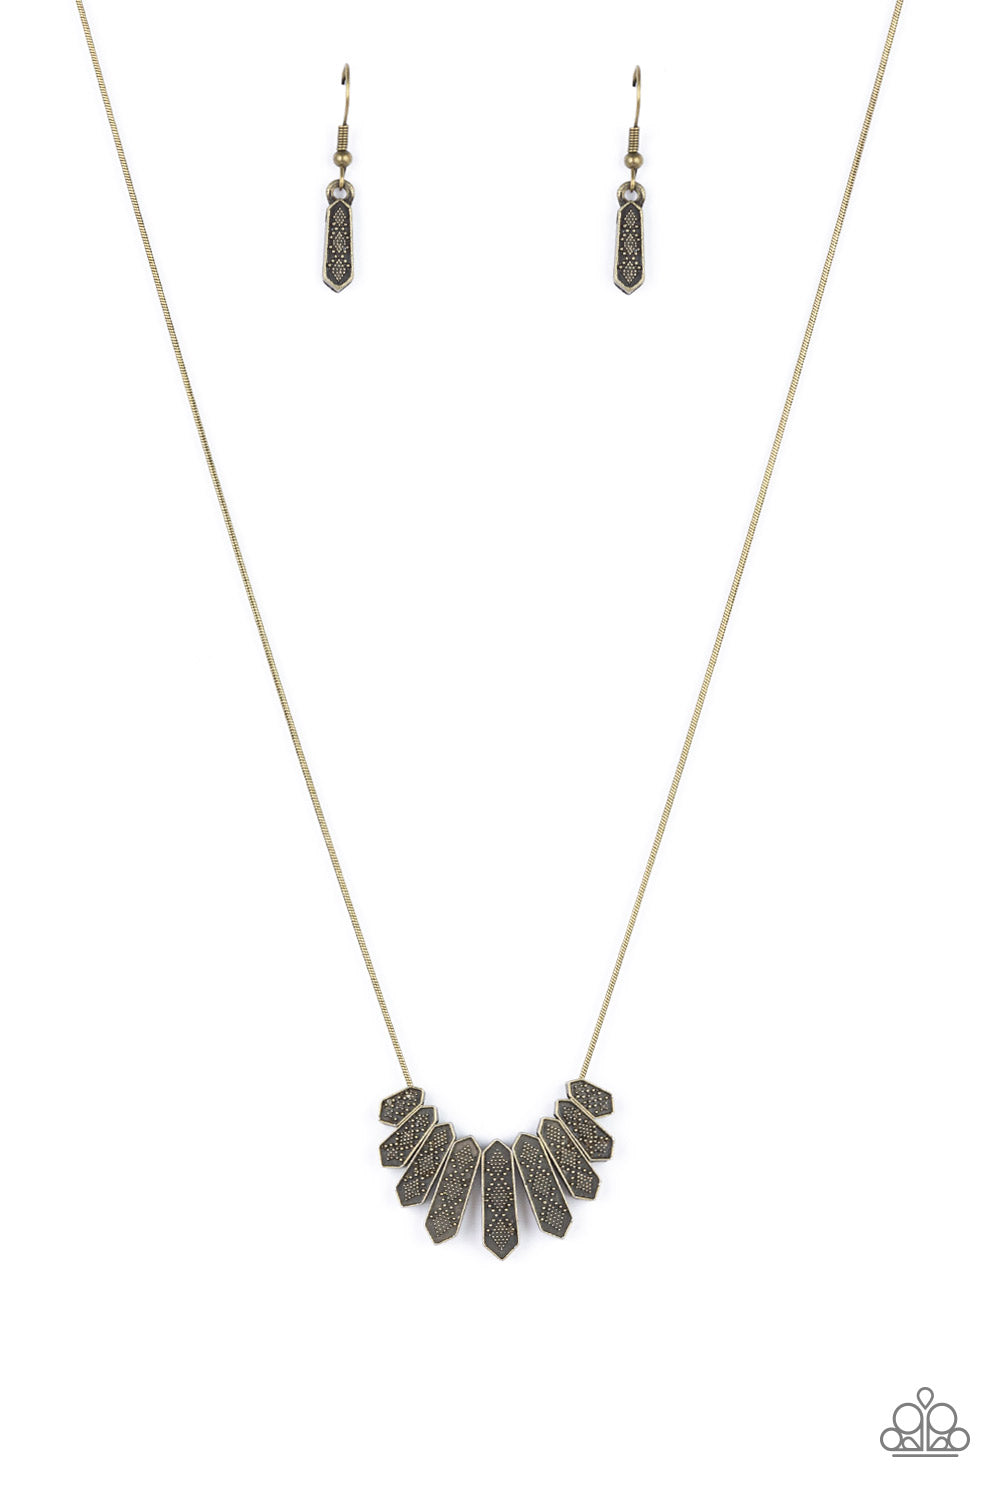 Monumental March Paparazzi Accessories Necklace with Earrings Brass